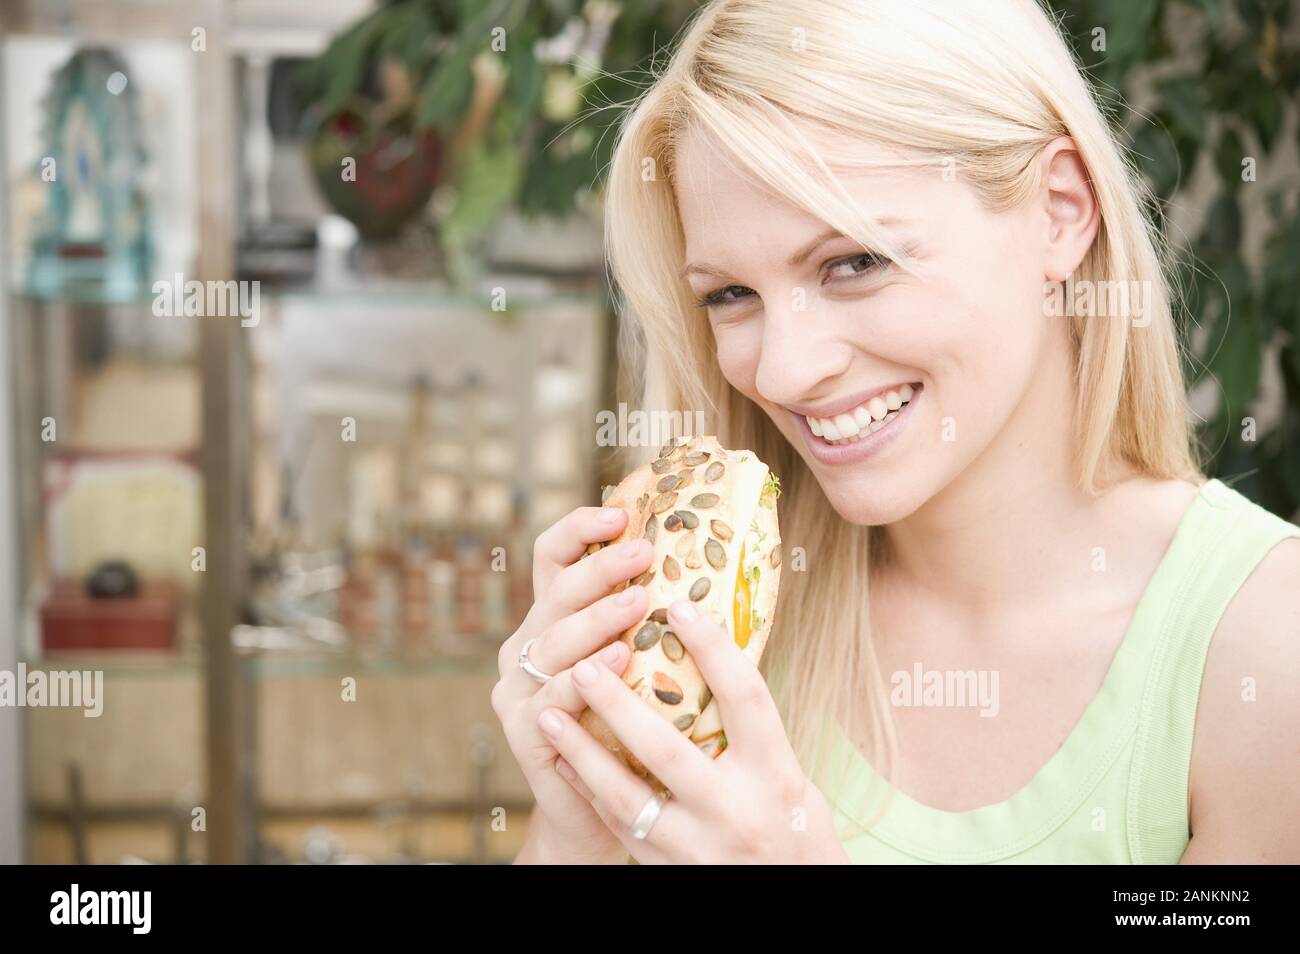 Junge Frau isst gesundes Brot - Young Woman eating Pain Banque D'Images